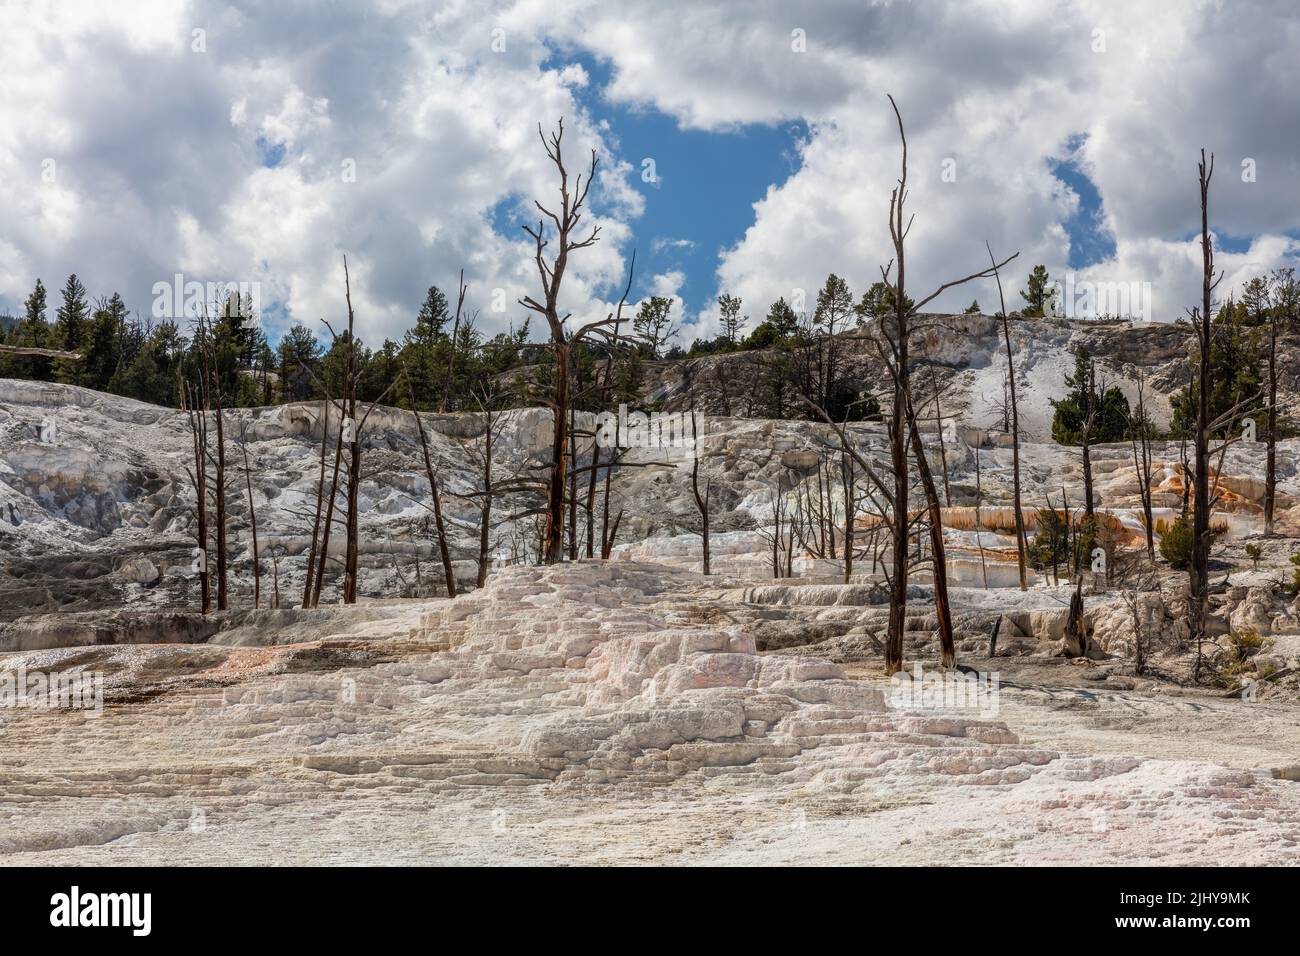 Squelettes d'arbres morts et travertin, terrasses Upper Mammoth, sources thermales Mammoth, parc national de Yellowstone, Wyoming Banque D'Images